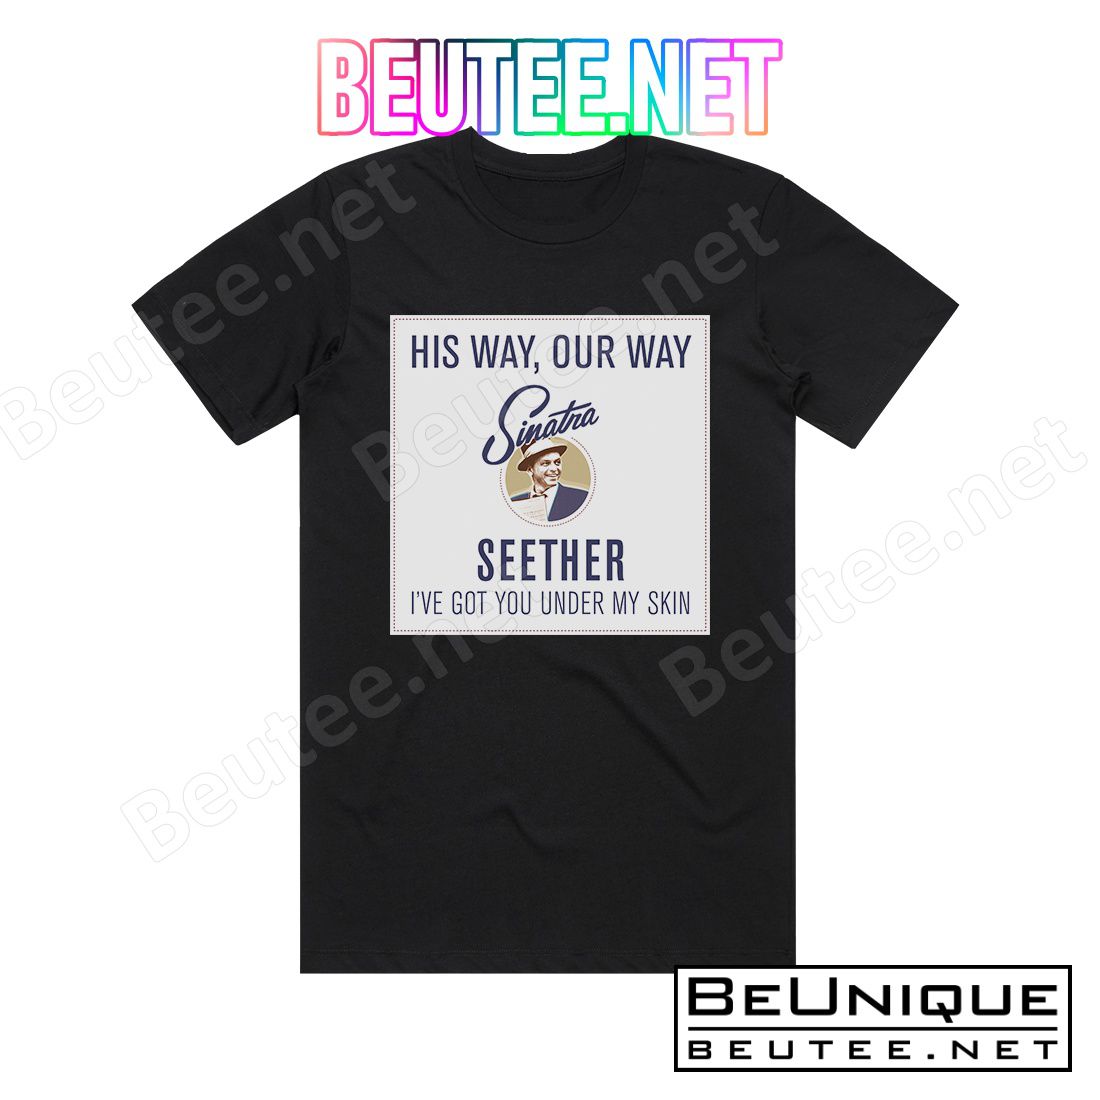 Seether I've Got You Under My Skin Album Cover T-Shirt